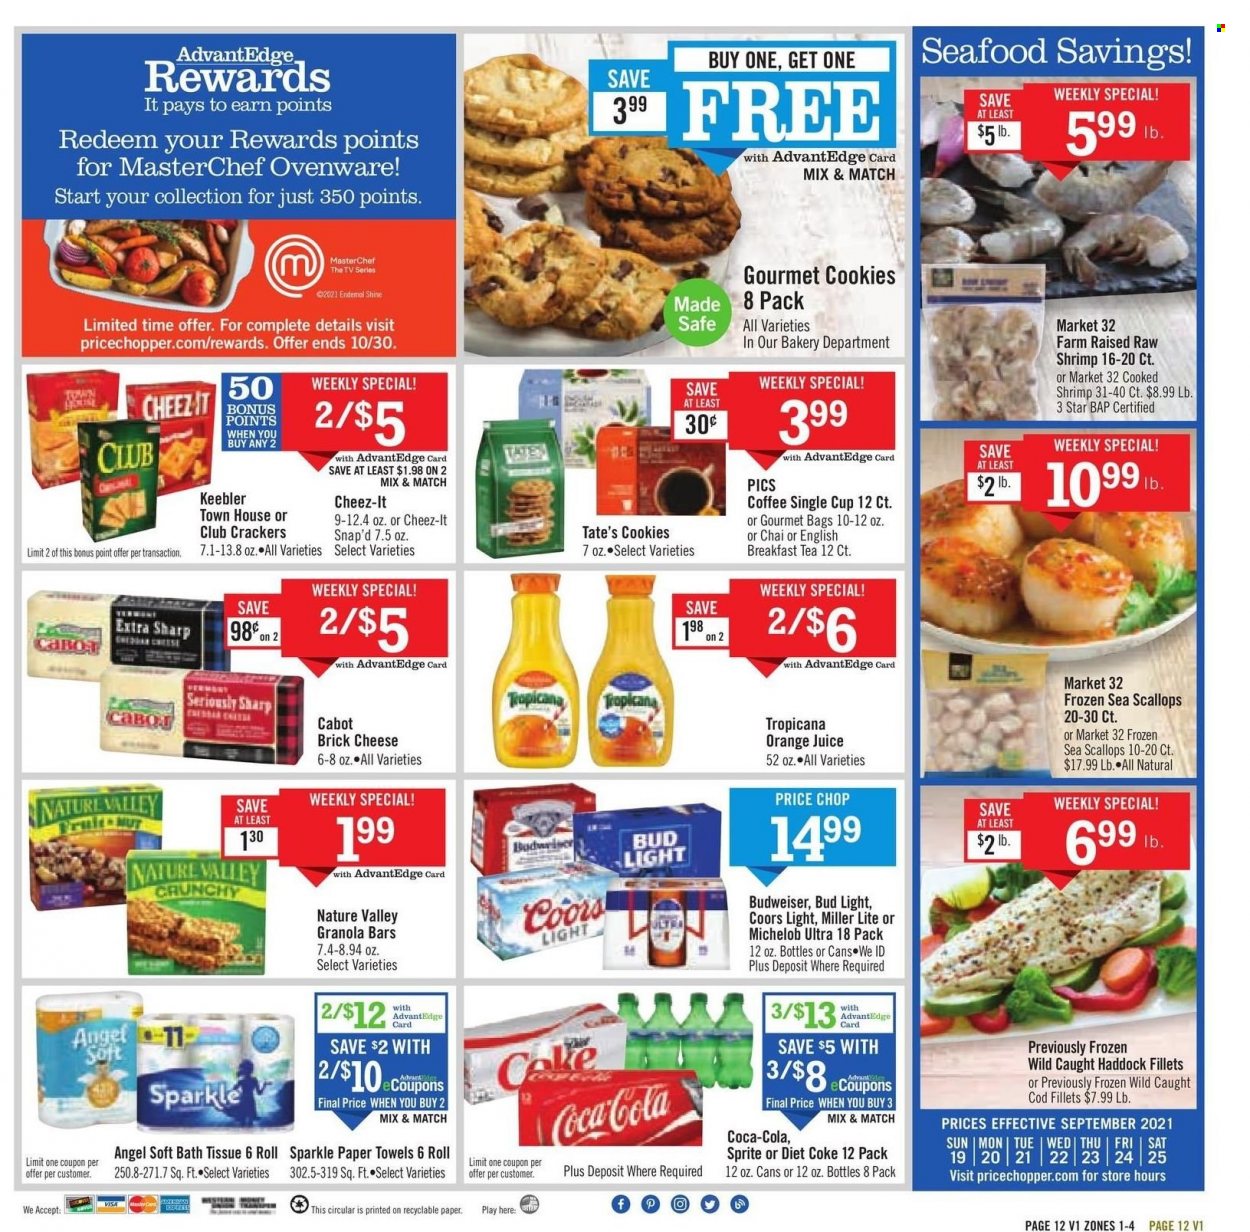 thumbnail - Price Chopper Flyer - 09/19/2021 - 09/25/2021 - Sales products - cod, scallops, haddock, seafood, shrimps, brick cheese, cheese, cookies, crackers, Keebler, Cheez-It, granola bar, Nature Valley, Coca-Cola, Sprite, orange juice, juice, Diet Coke, tea, coffee, beer, Bud Light, bath tissue, kitchen towels, paper towels, Budweiser, Miller Lite, Coors, Michelob. Page 12.